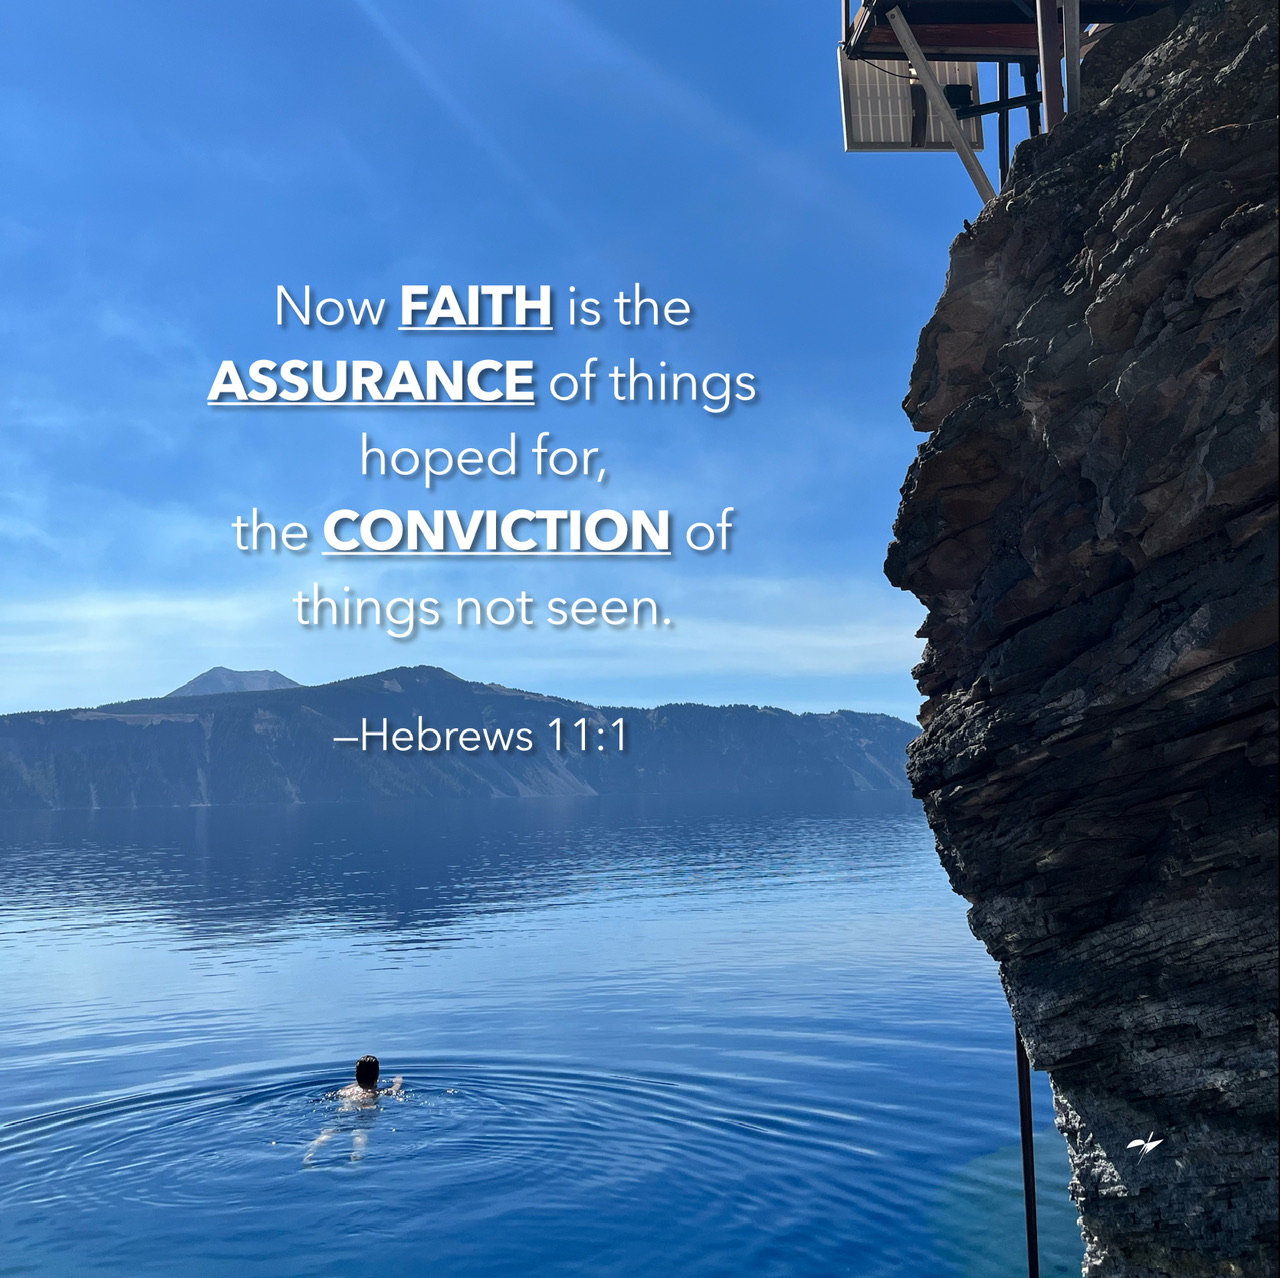 How Will You Apply FAITH to the Breakthrough You’re Seeking Today?